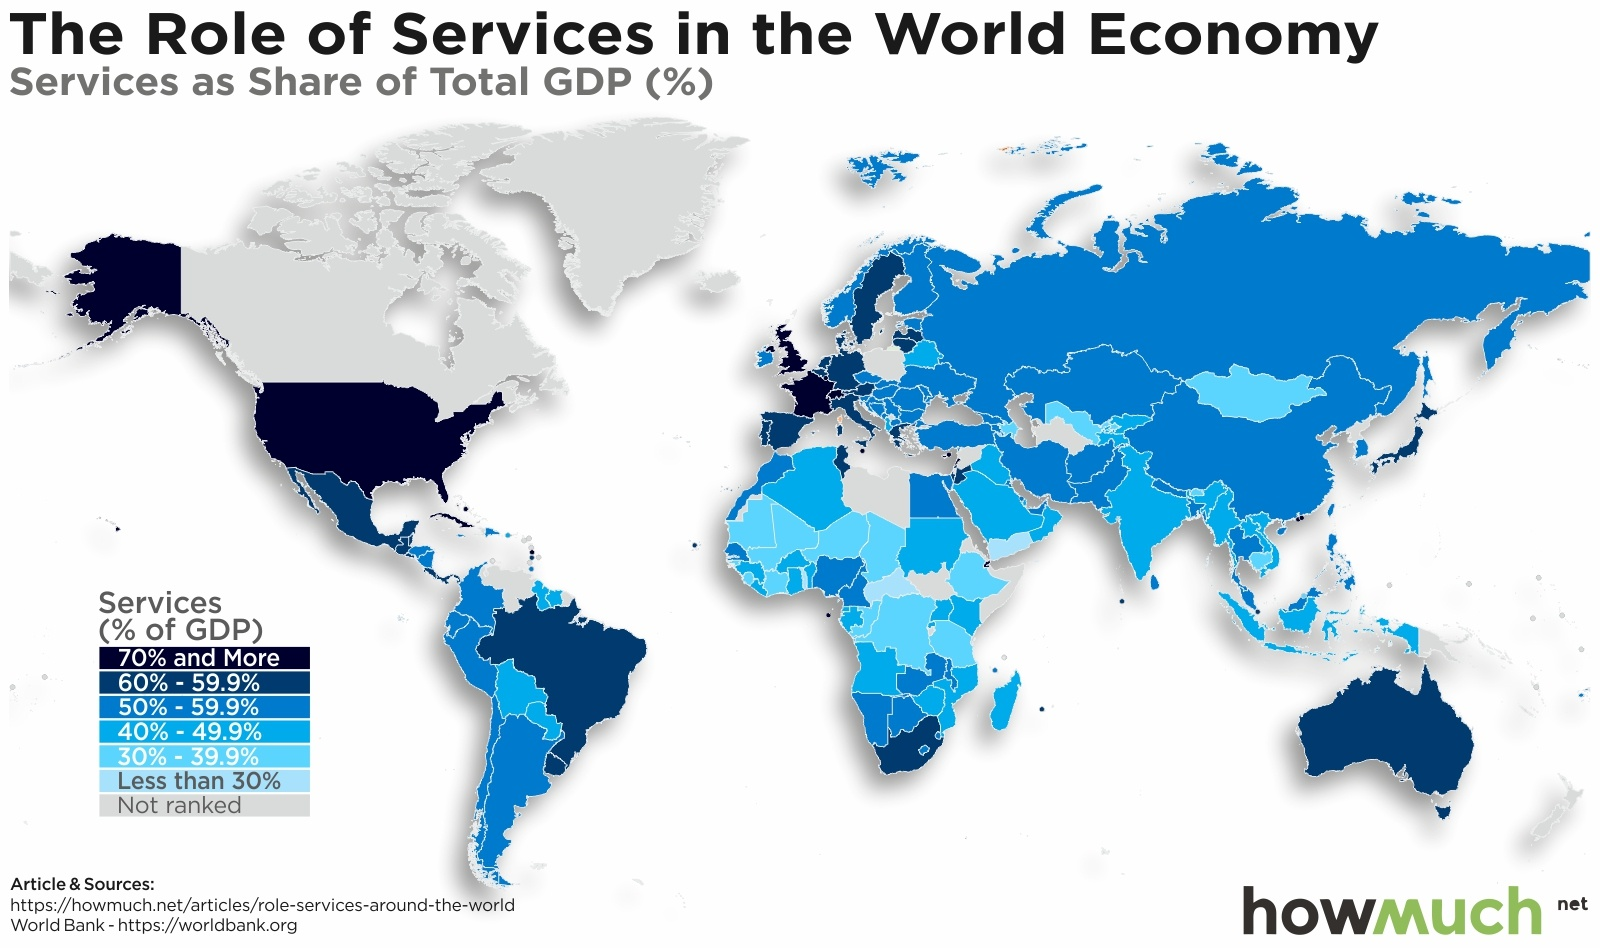 A map showing the service sector of the world.